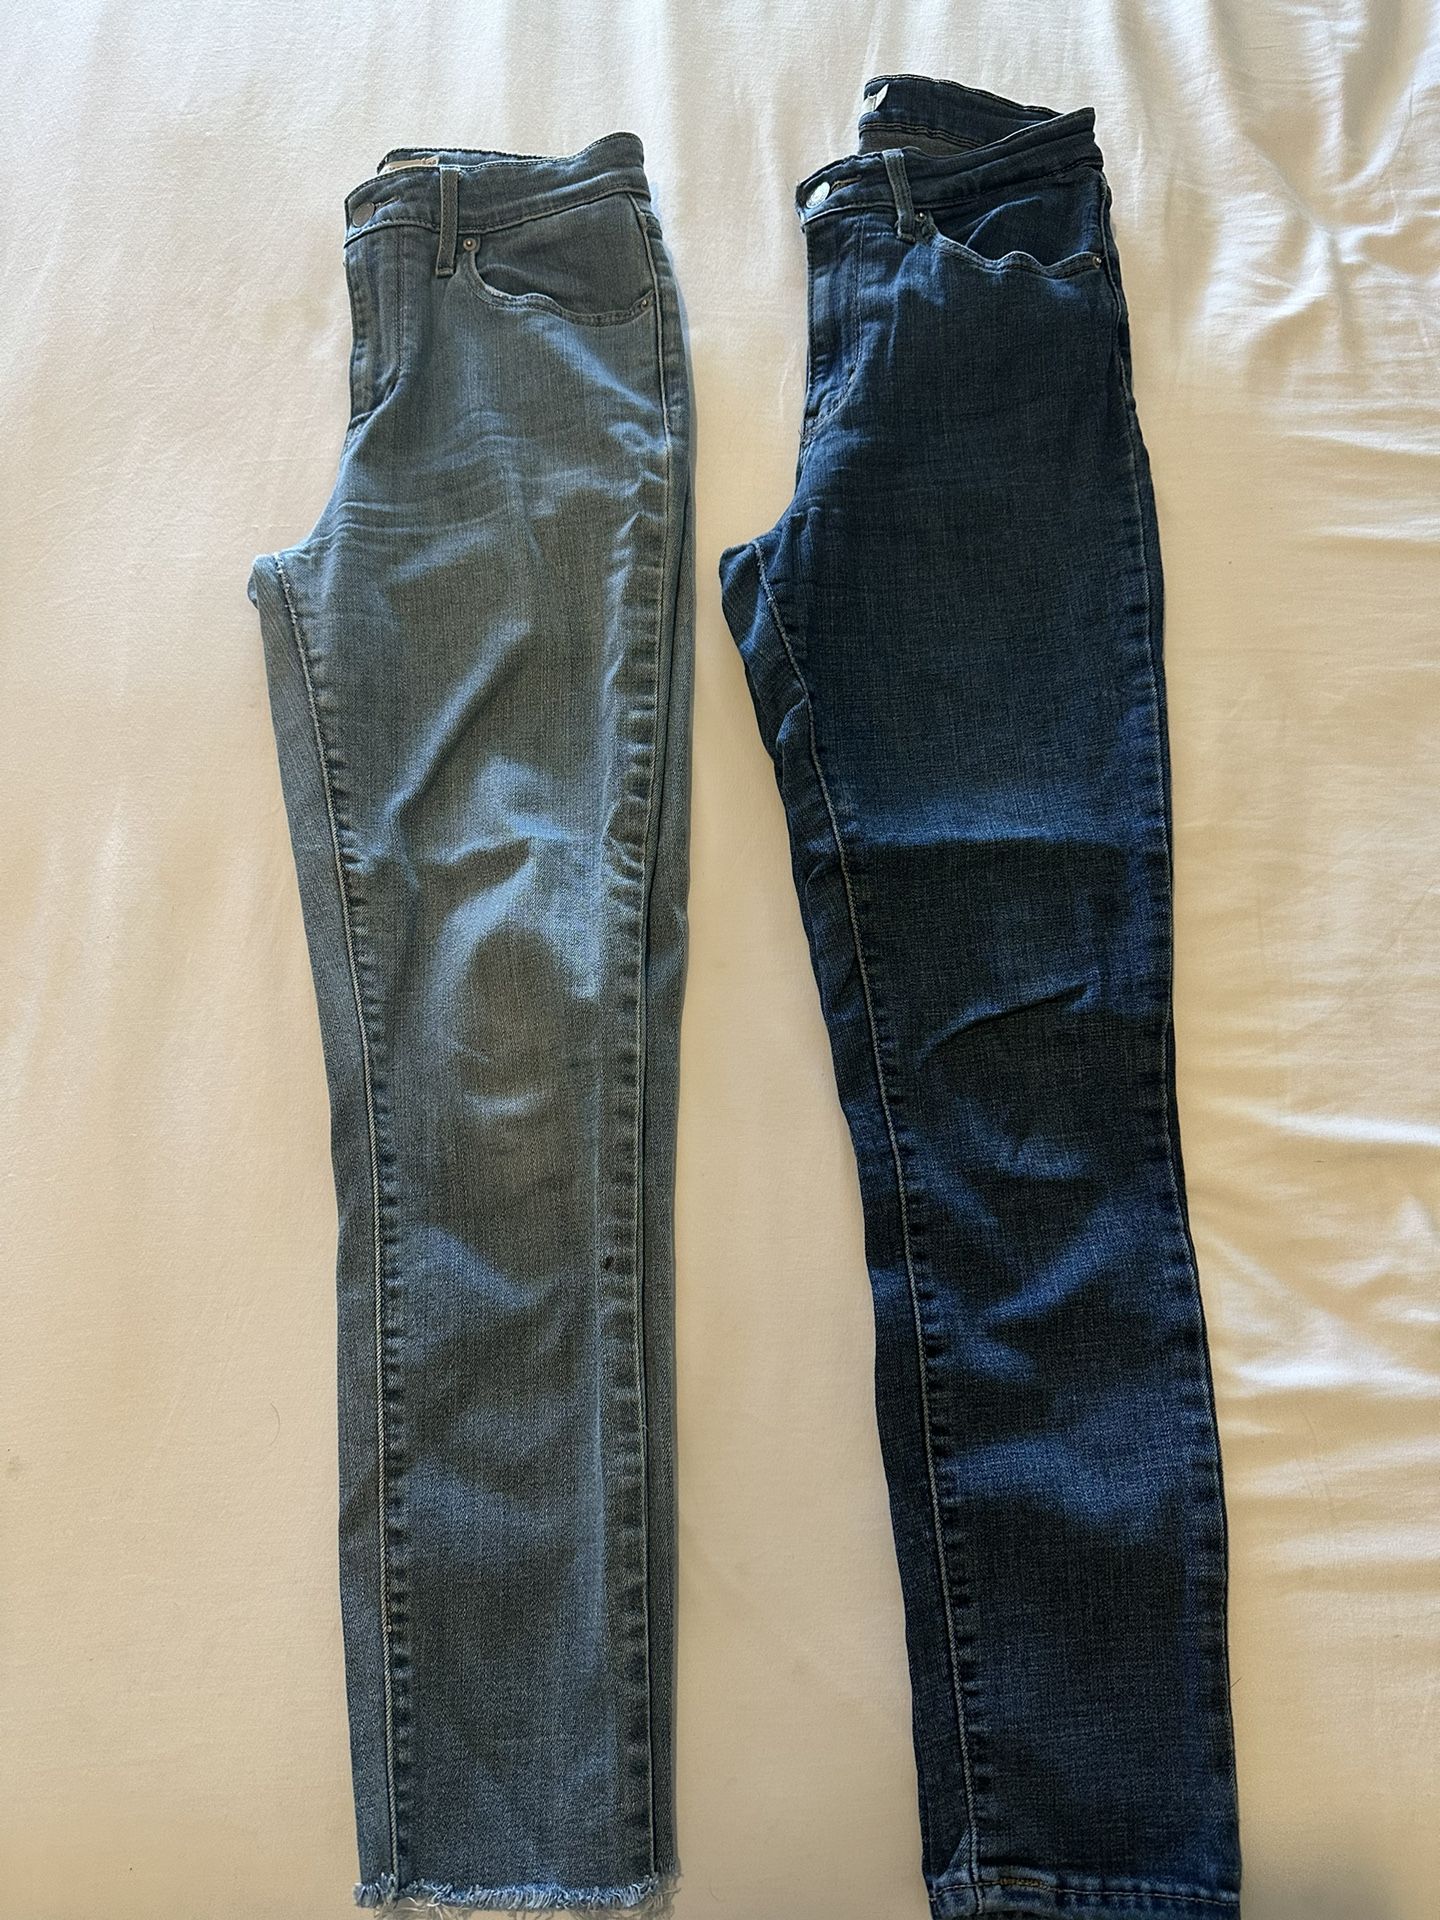 2 Pair Of Levi’s Bundle Of 2 For $50